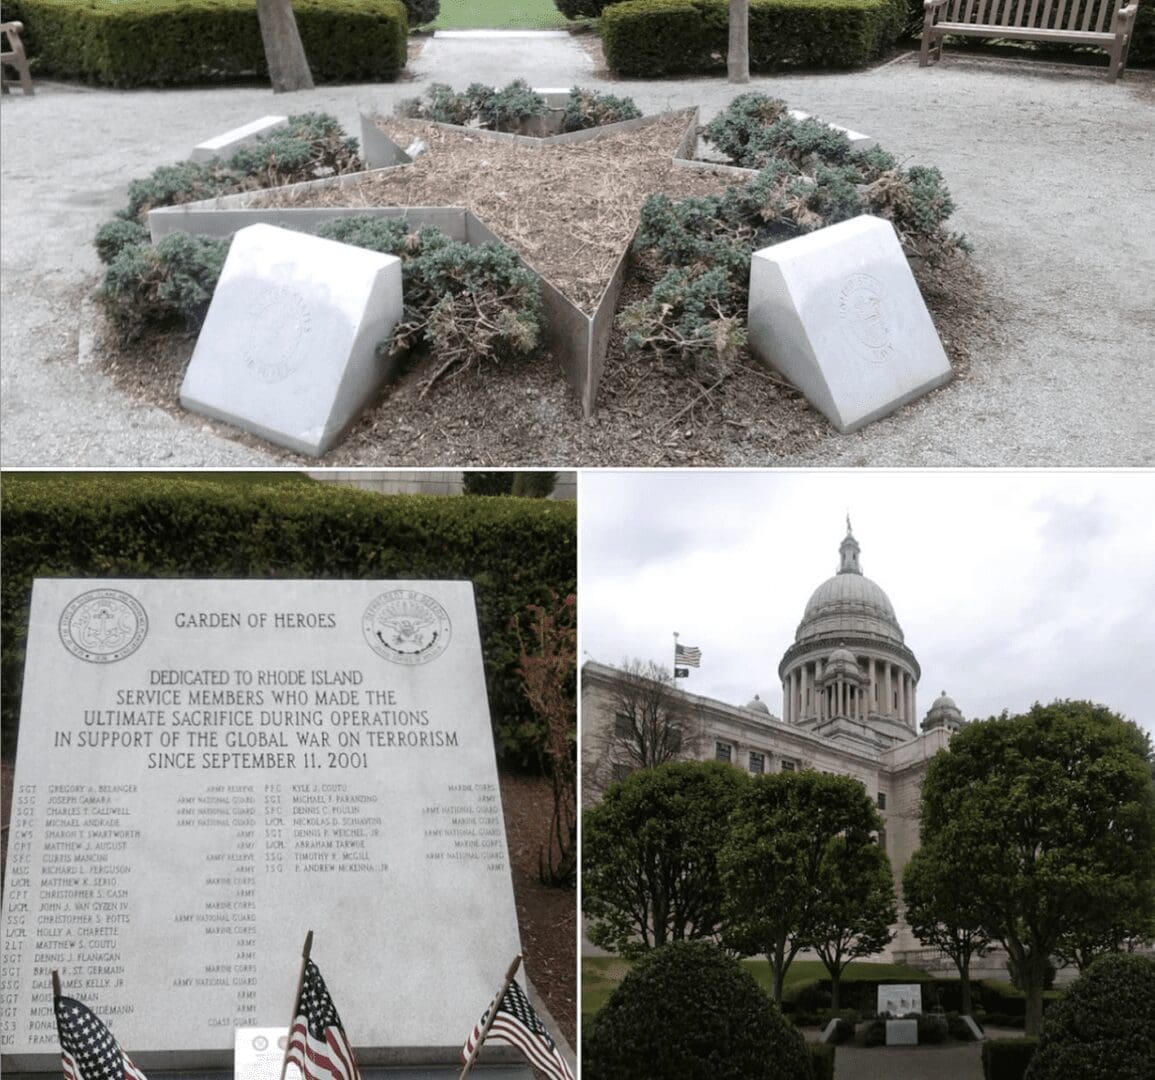 A collage of photos showing a statue of a soldier and a memorial.